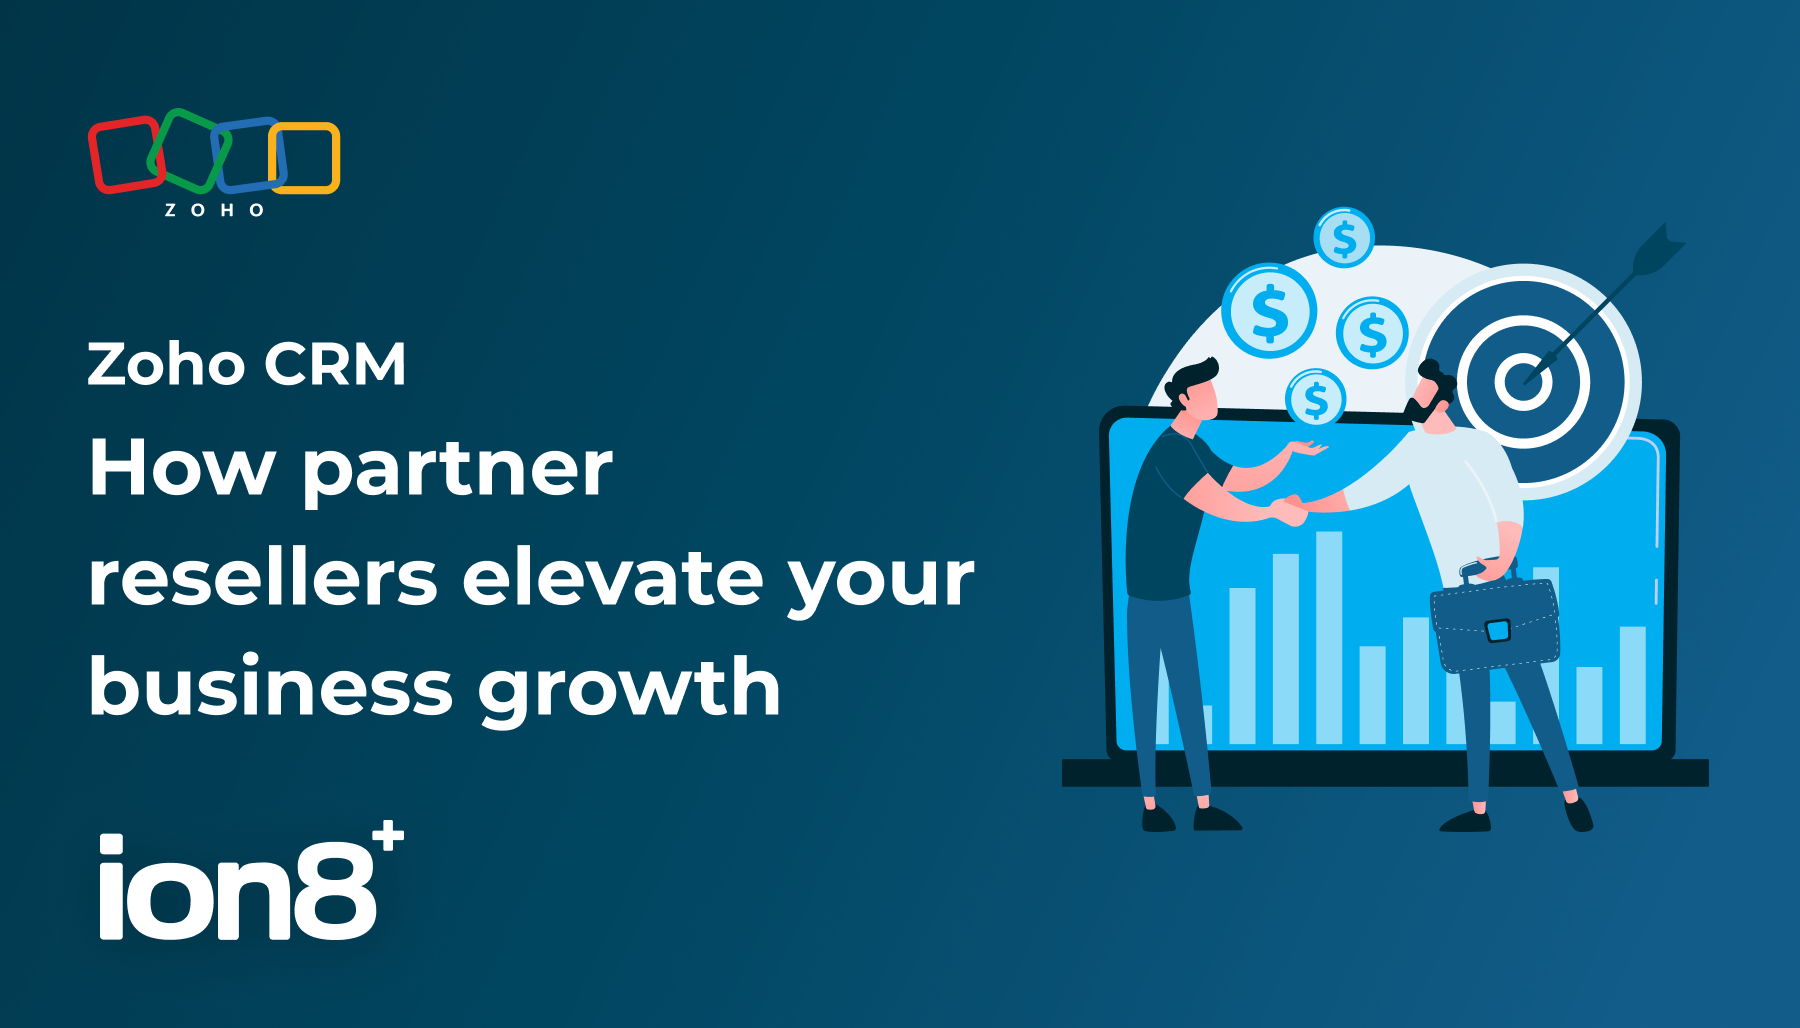 Unlocking the power of Zoho CRM: how partner resellers elevate your business growth